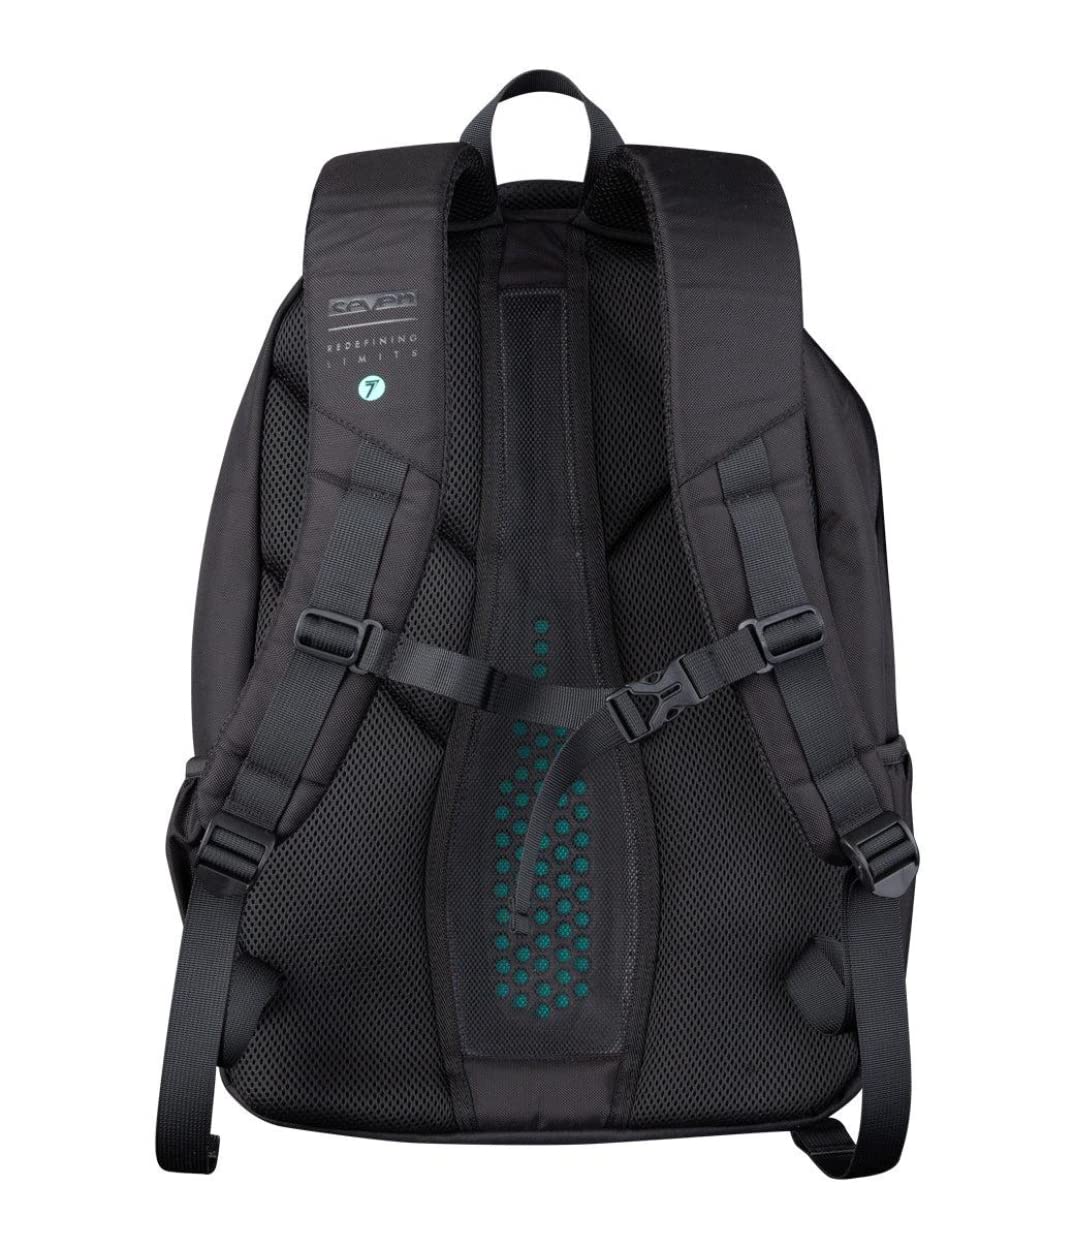 Seven Academy Backpack (Black, One Size)